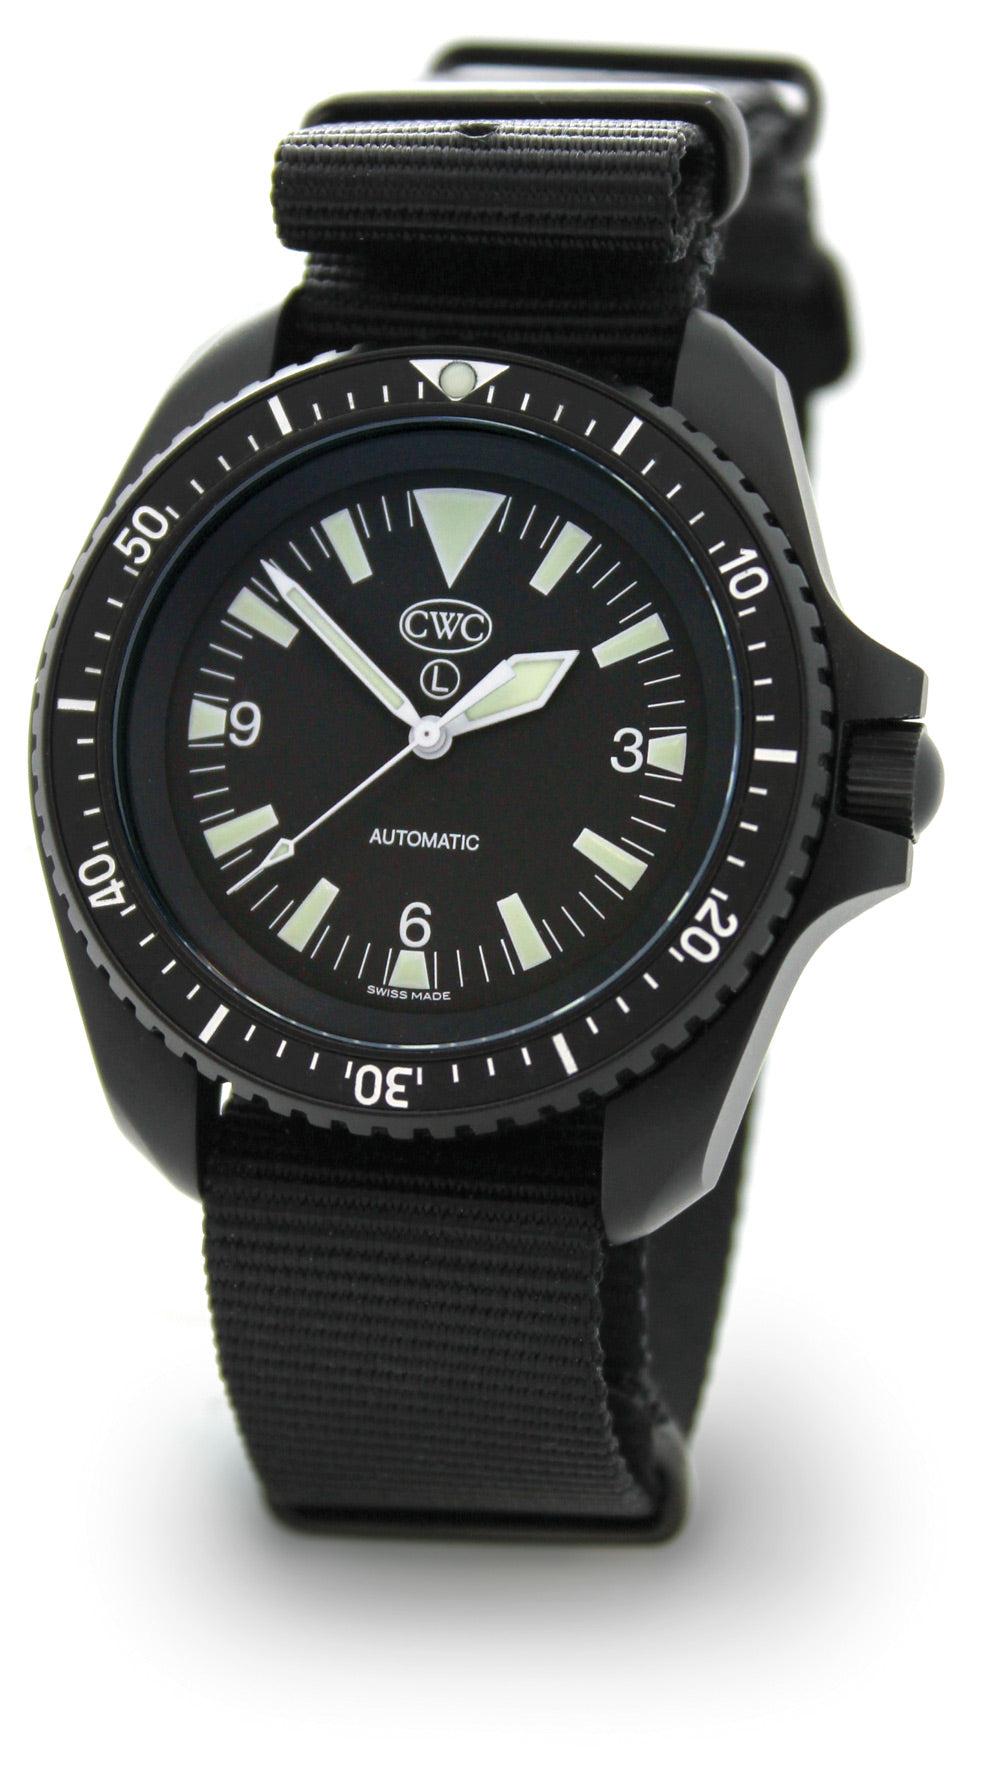 CWC DIVERS WATCH SF300 AS120